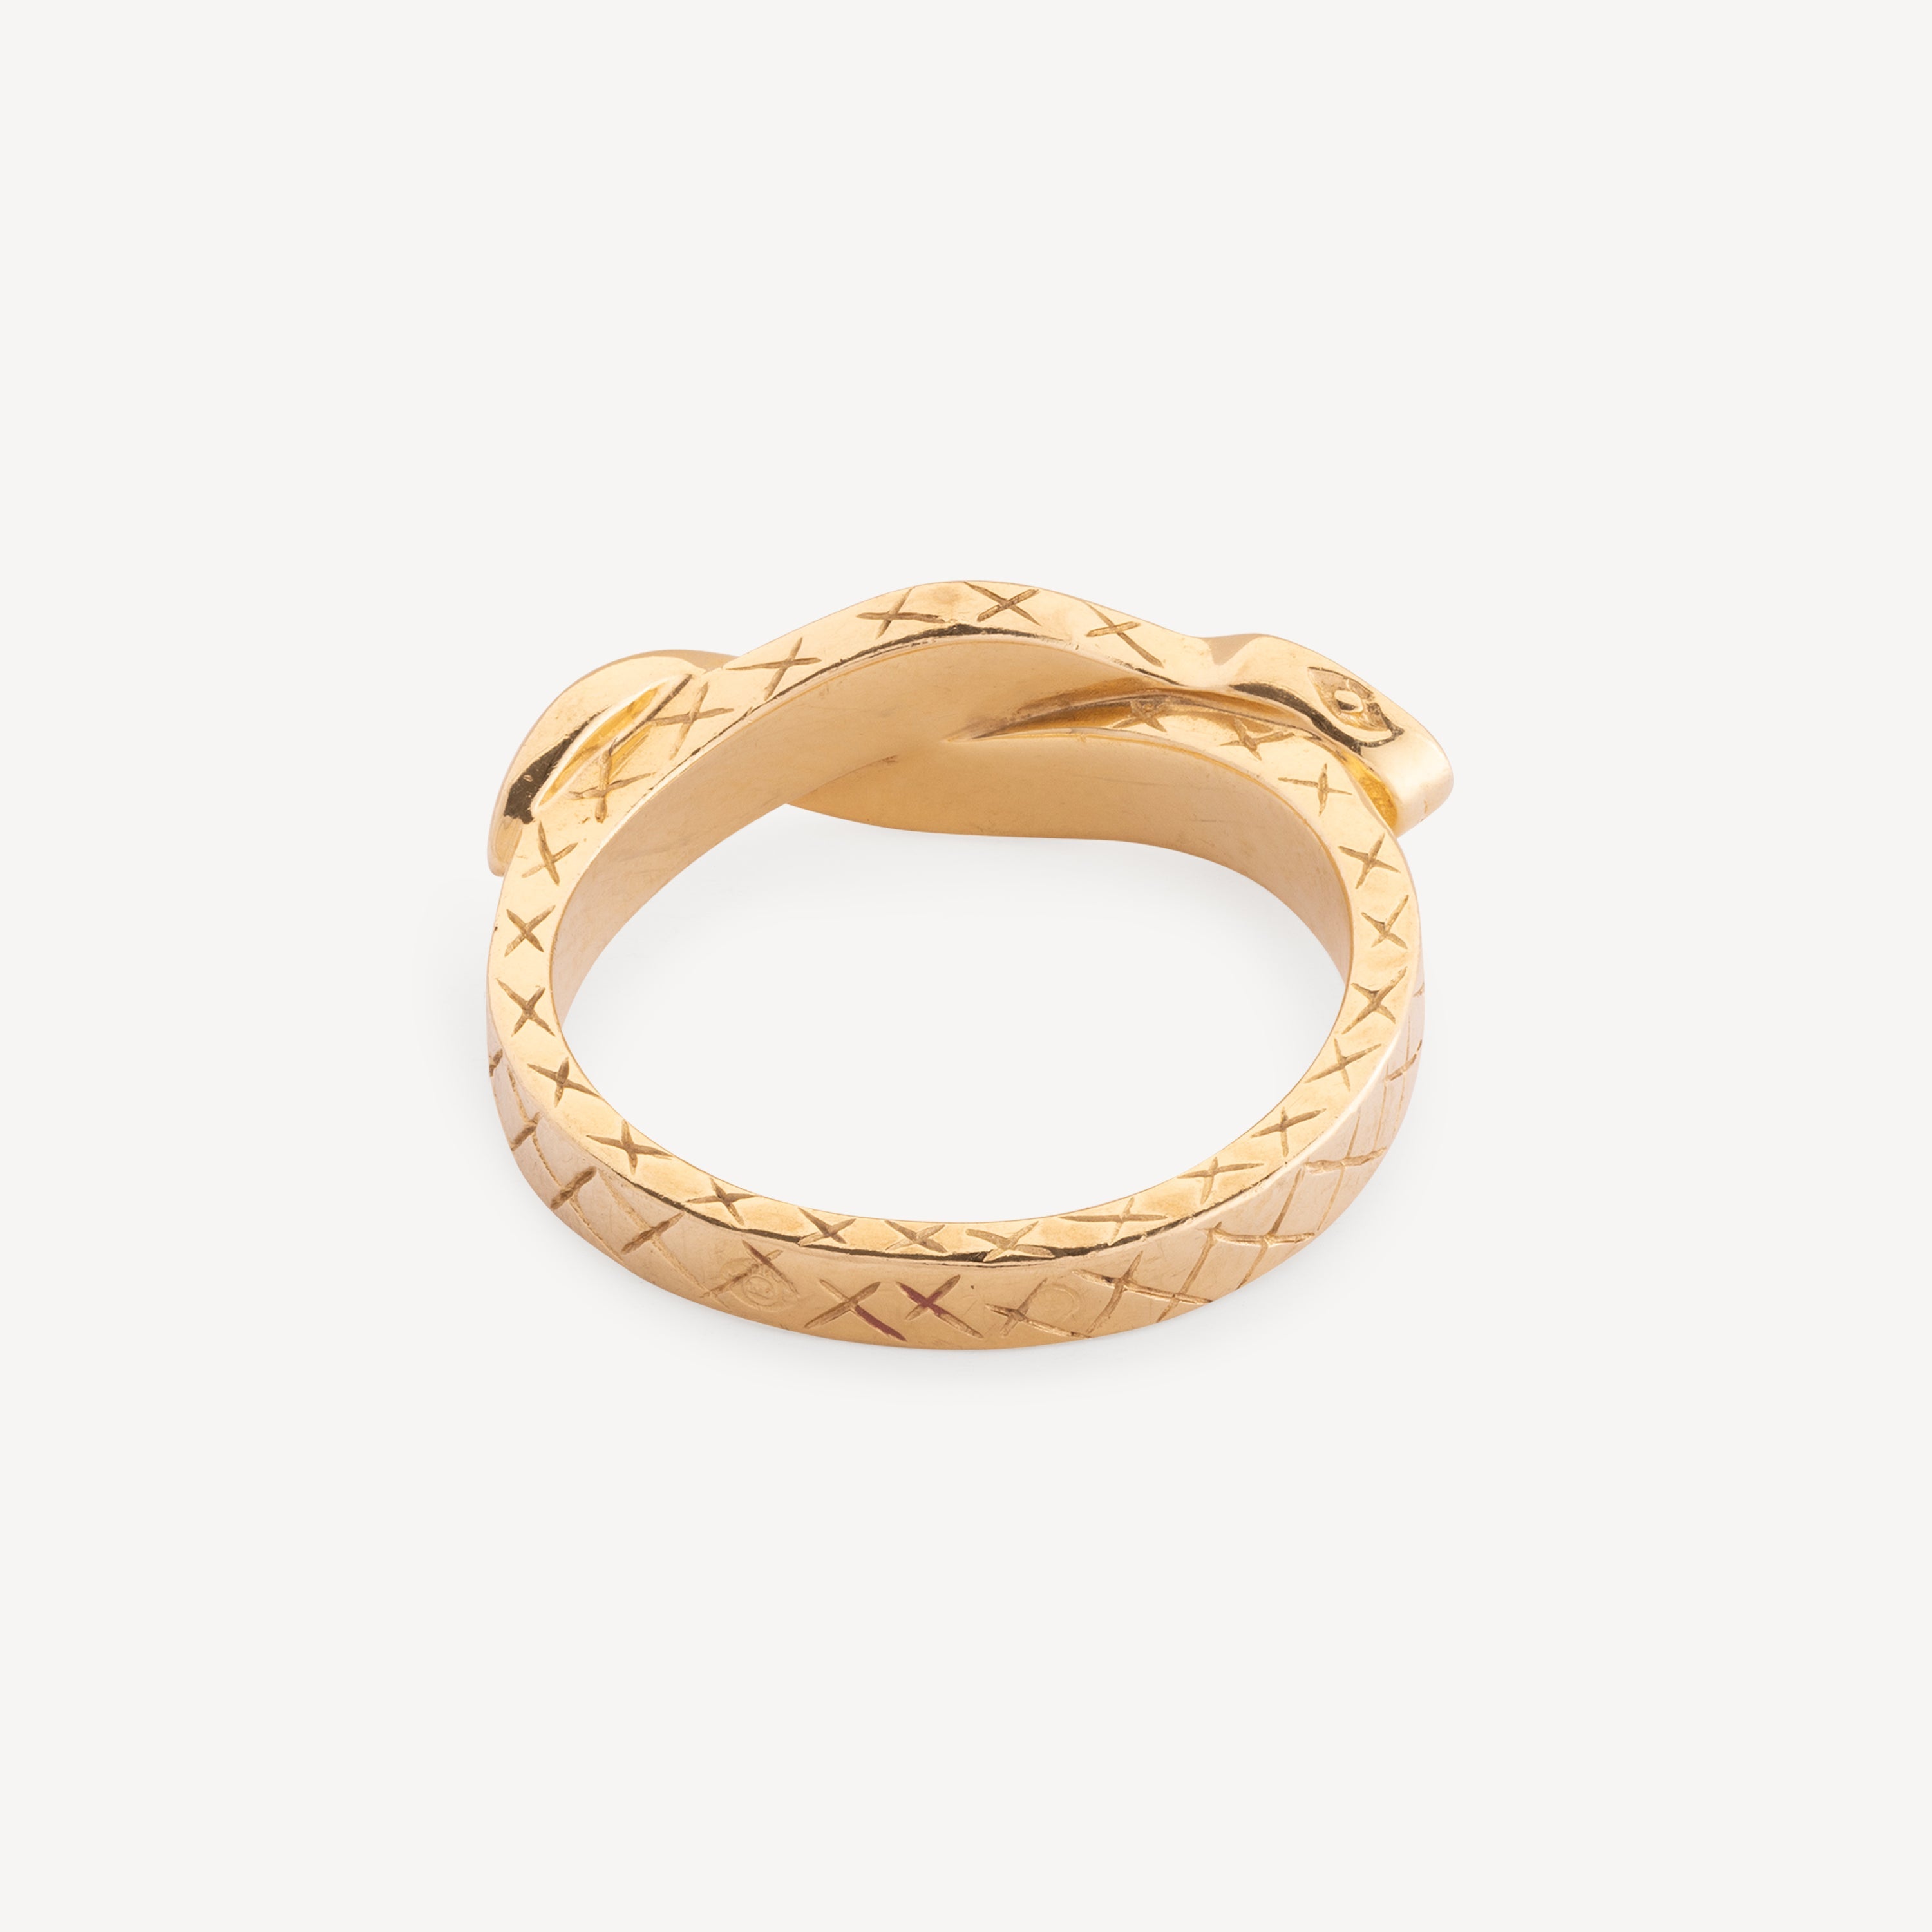 Shapes Studio Gold Ring 18K Gold Rings for Women, Wide Gold Silver Band, Stacking Rings, Gold Wedding Band Minimalist Style